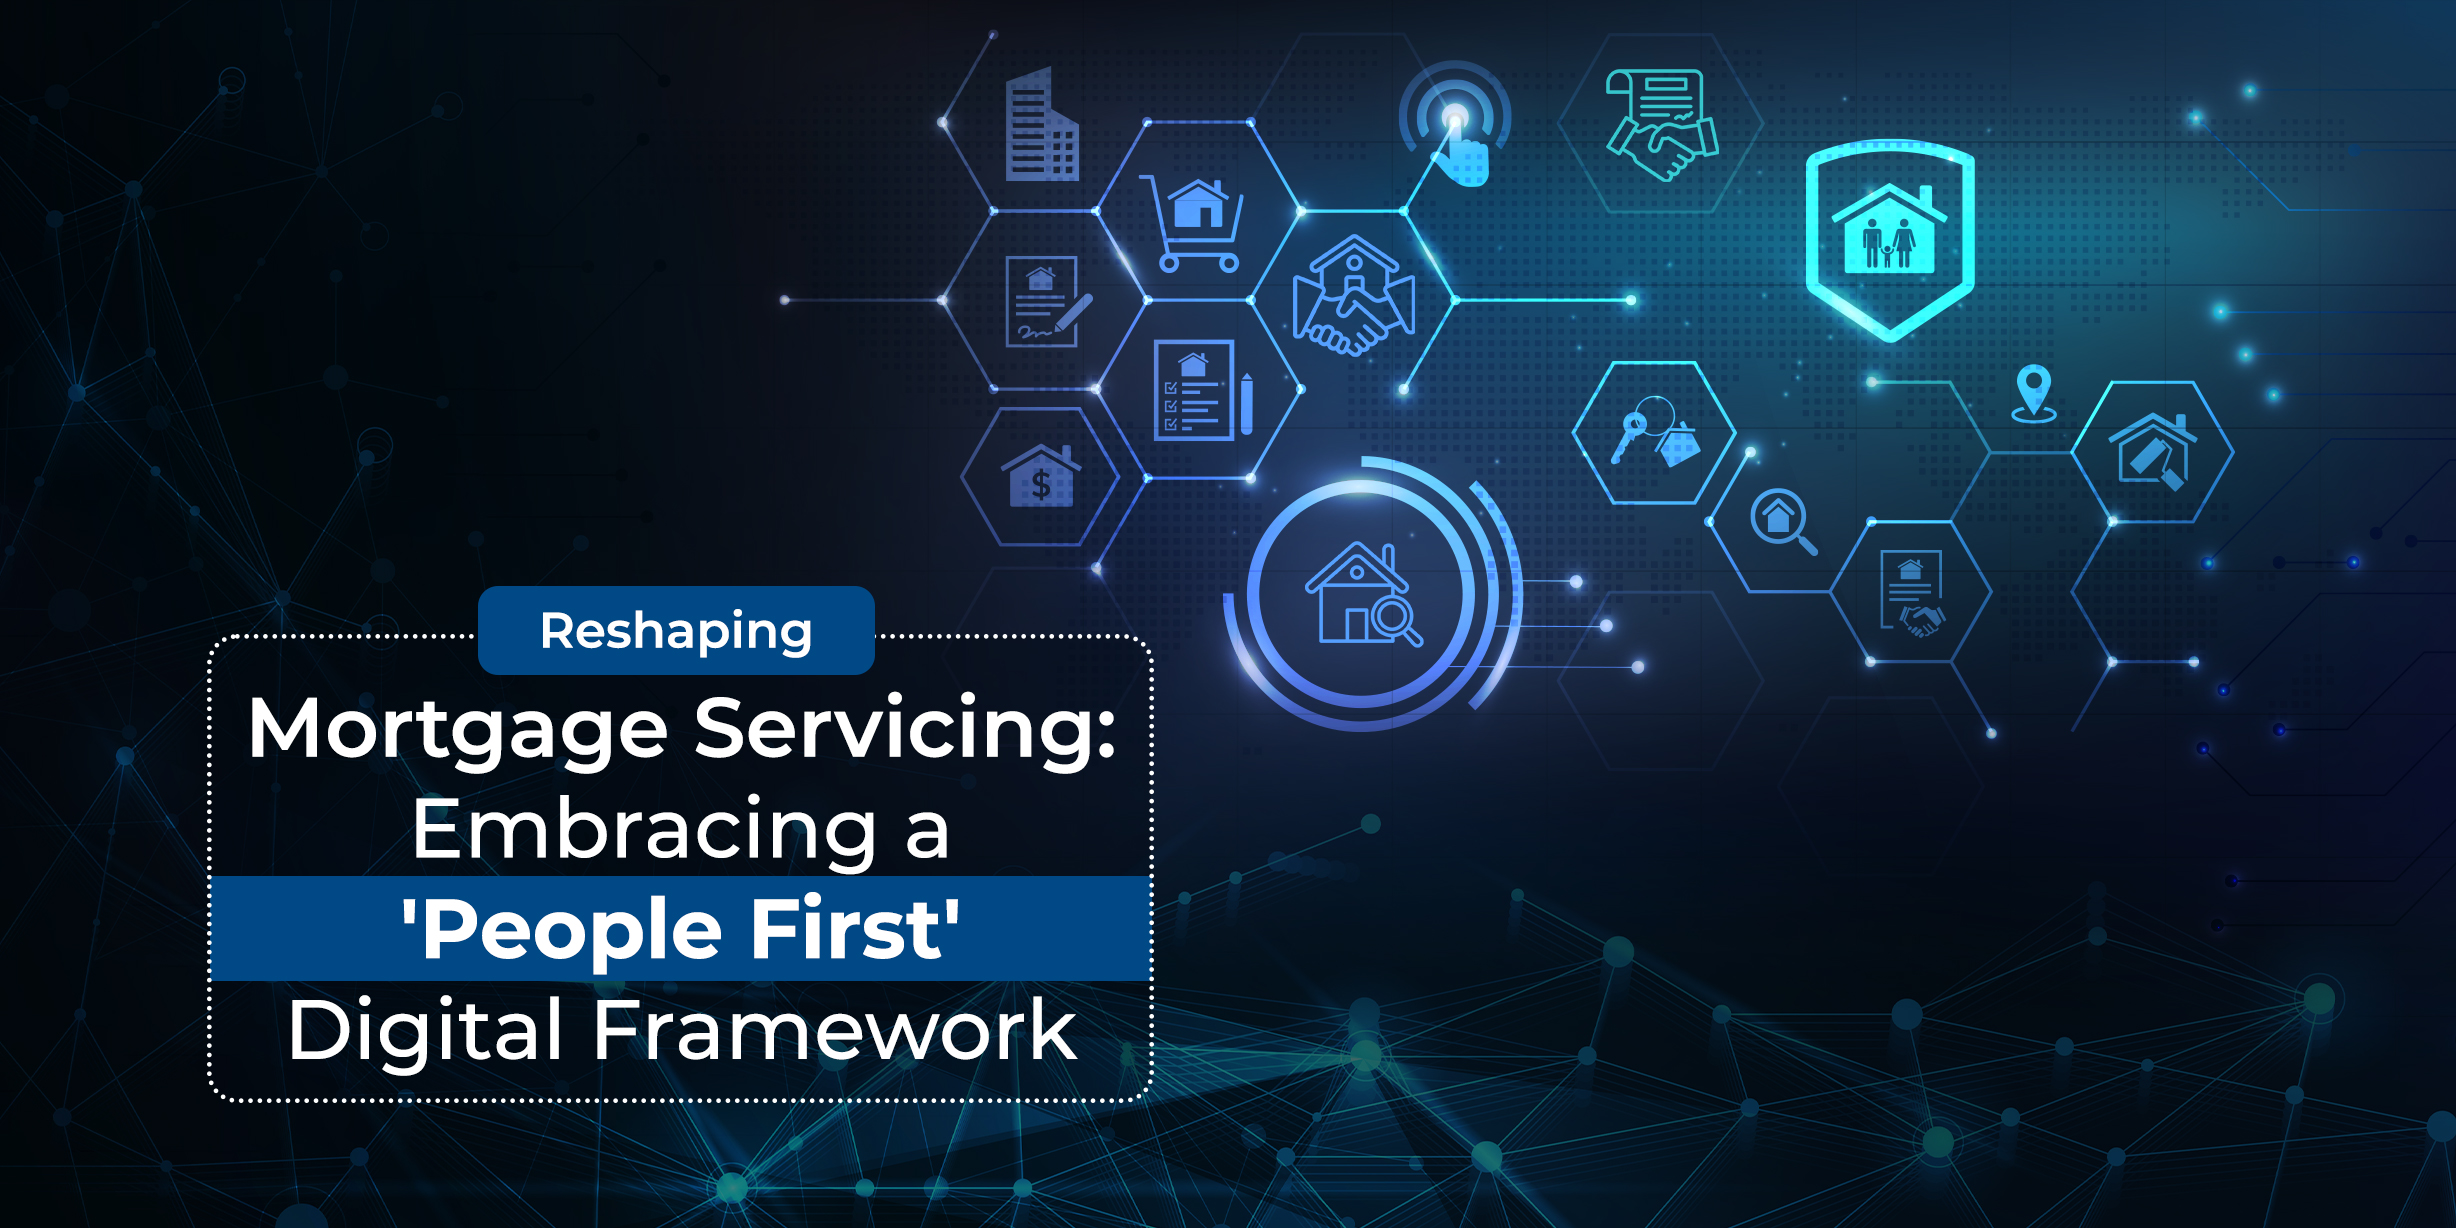 Reshaping Mortgage Servicing: Embracing a 'People First' Digital Framework